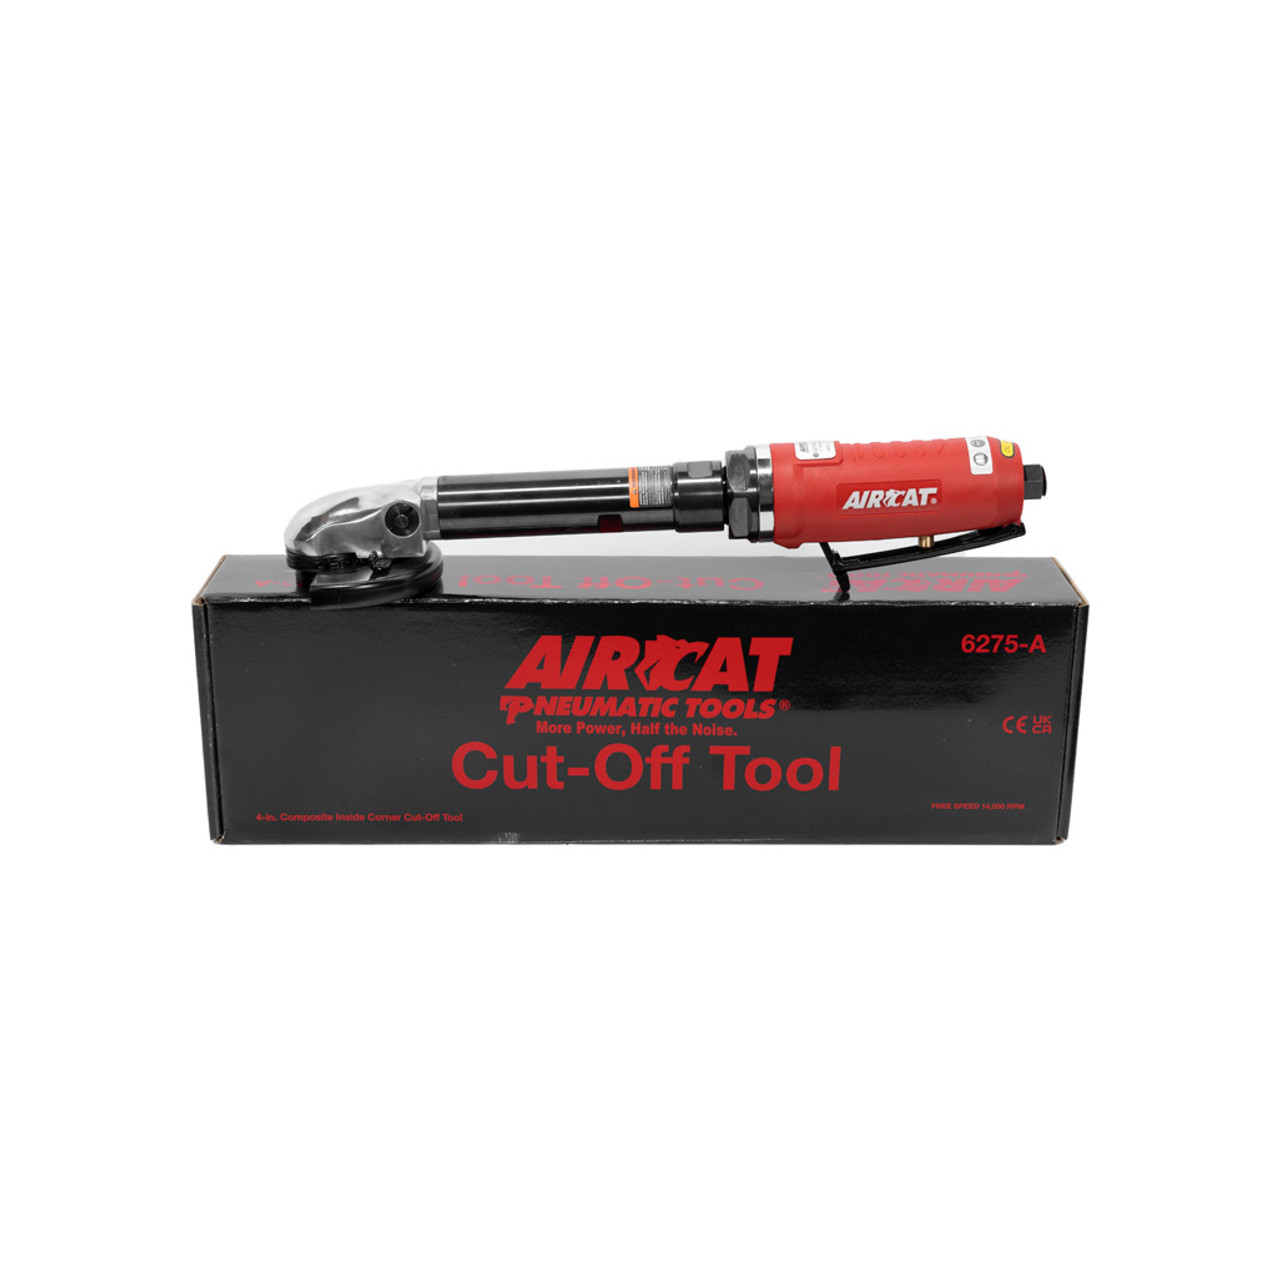 Aircat Cut-Off Tool 4" Cut-Off Tool with 1.0 Hp Motor and Spindle Lock  (6275-A) JB Tools